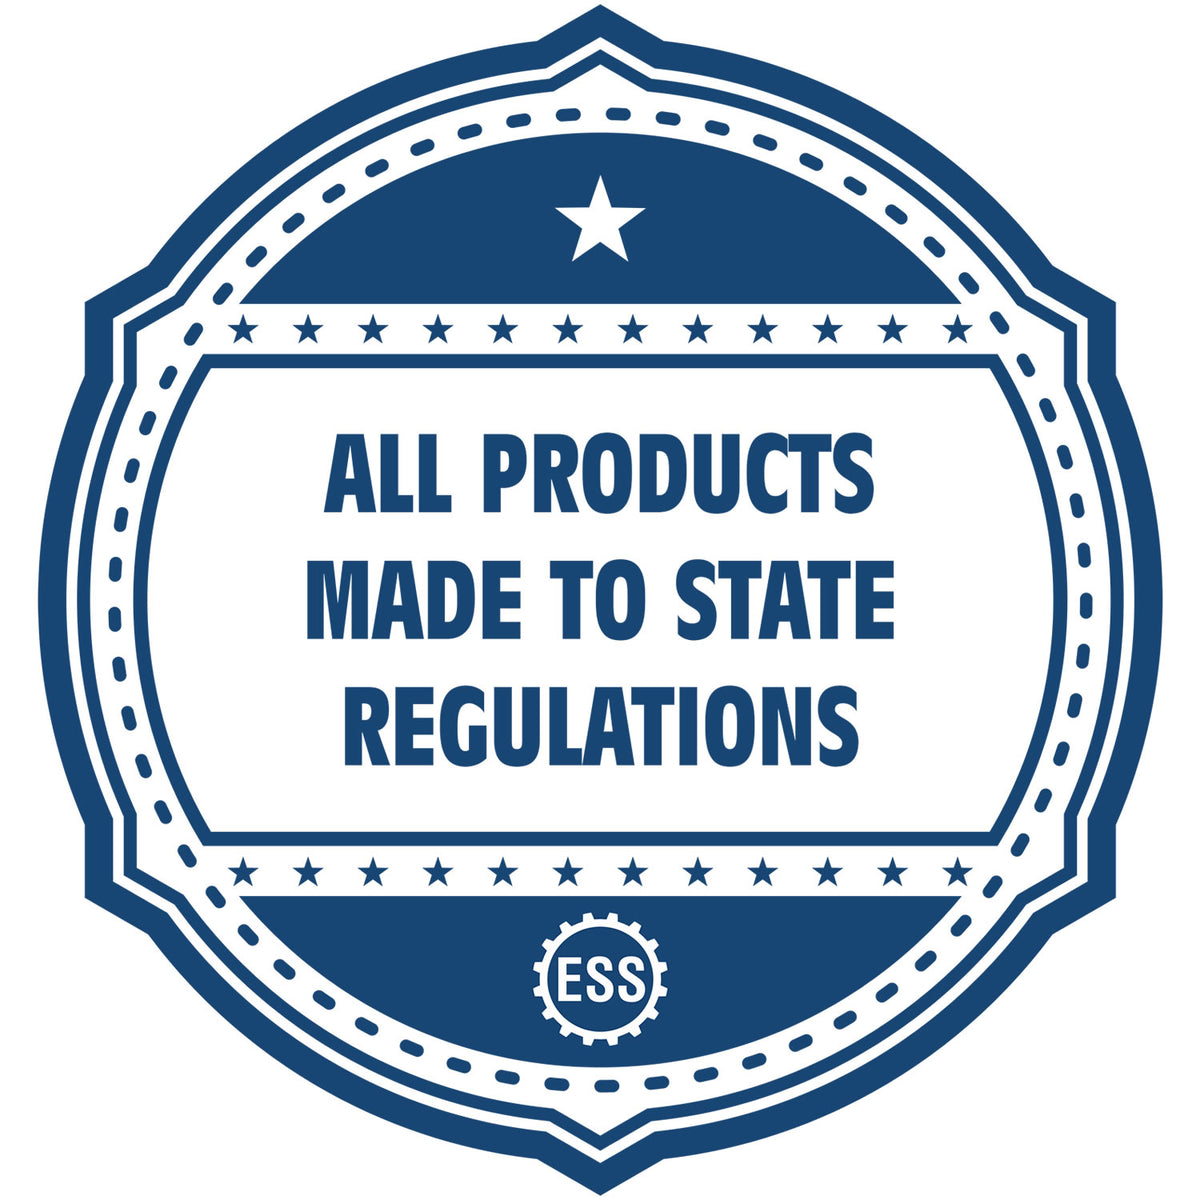 An icon or badge element for the State of Nebraska Architectural Seal Embosser showing that this product is made in compliance with state regulations.